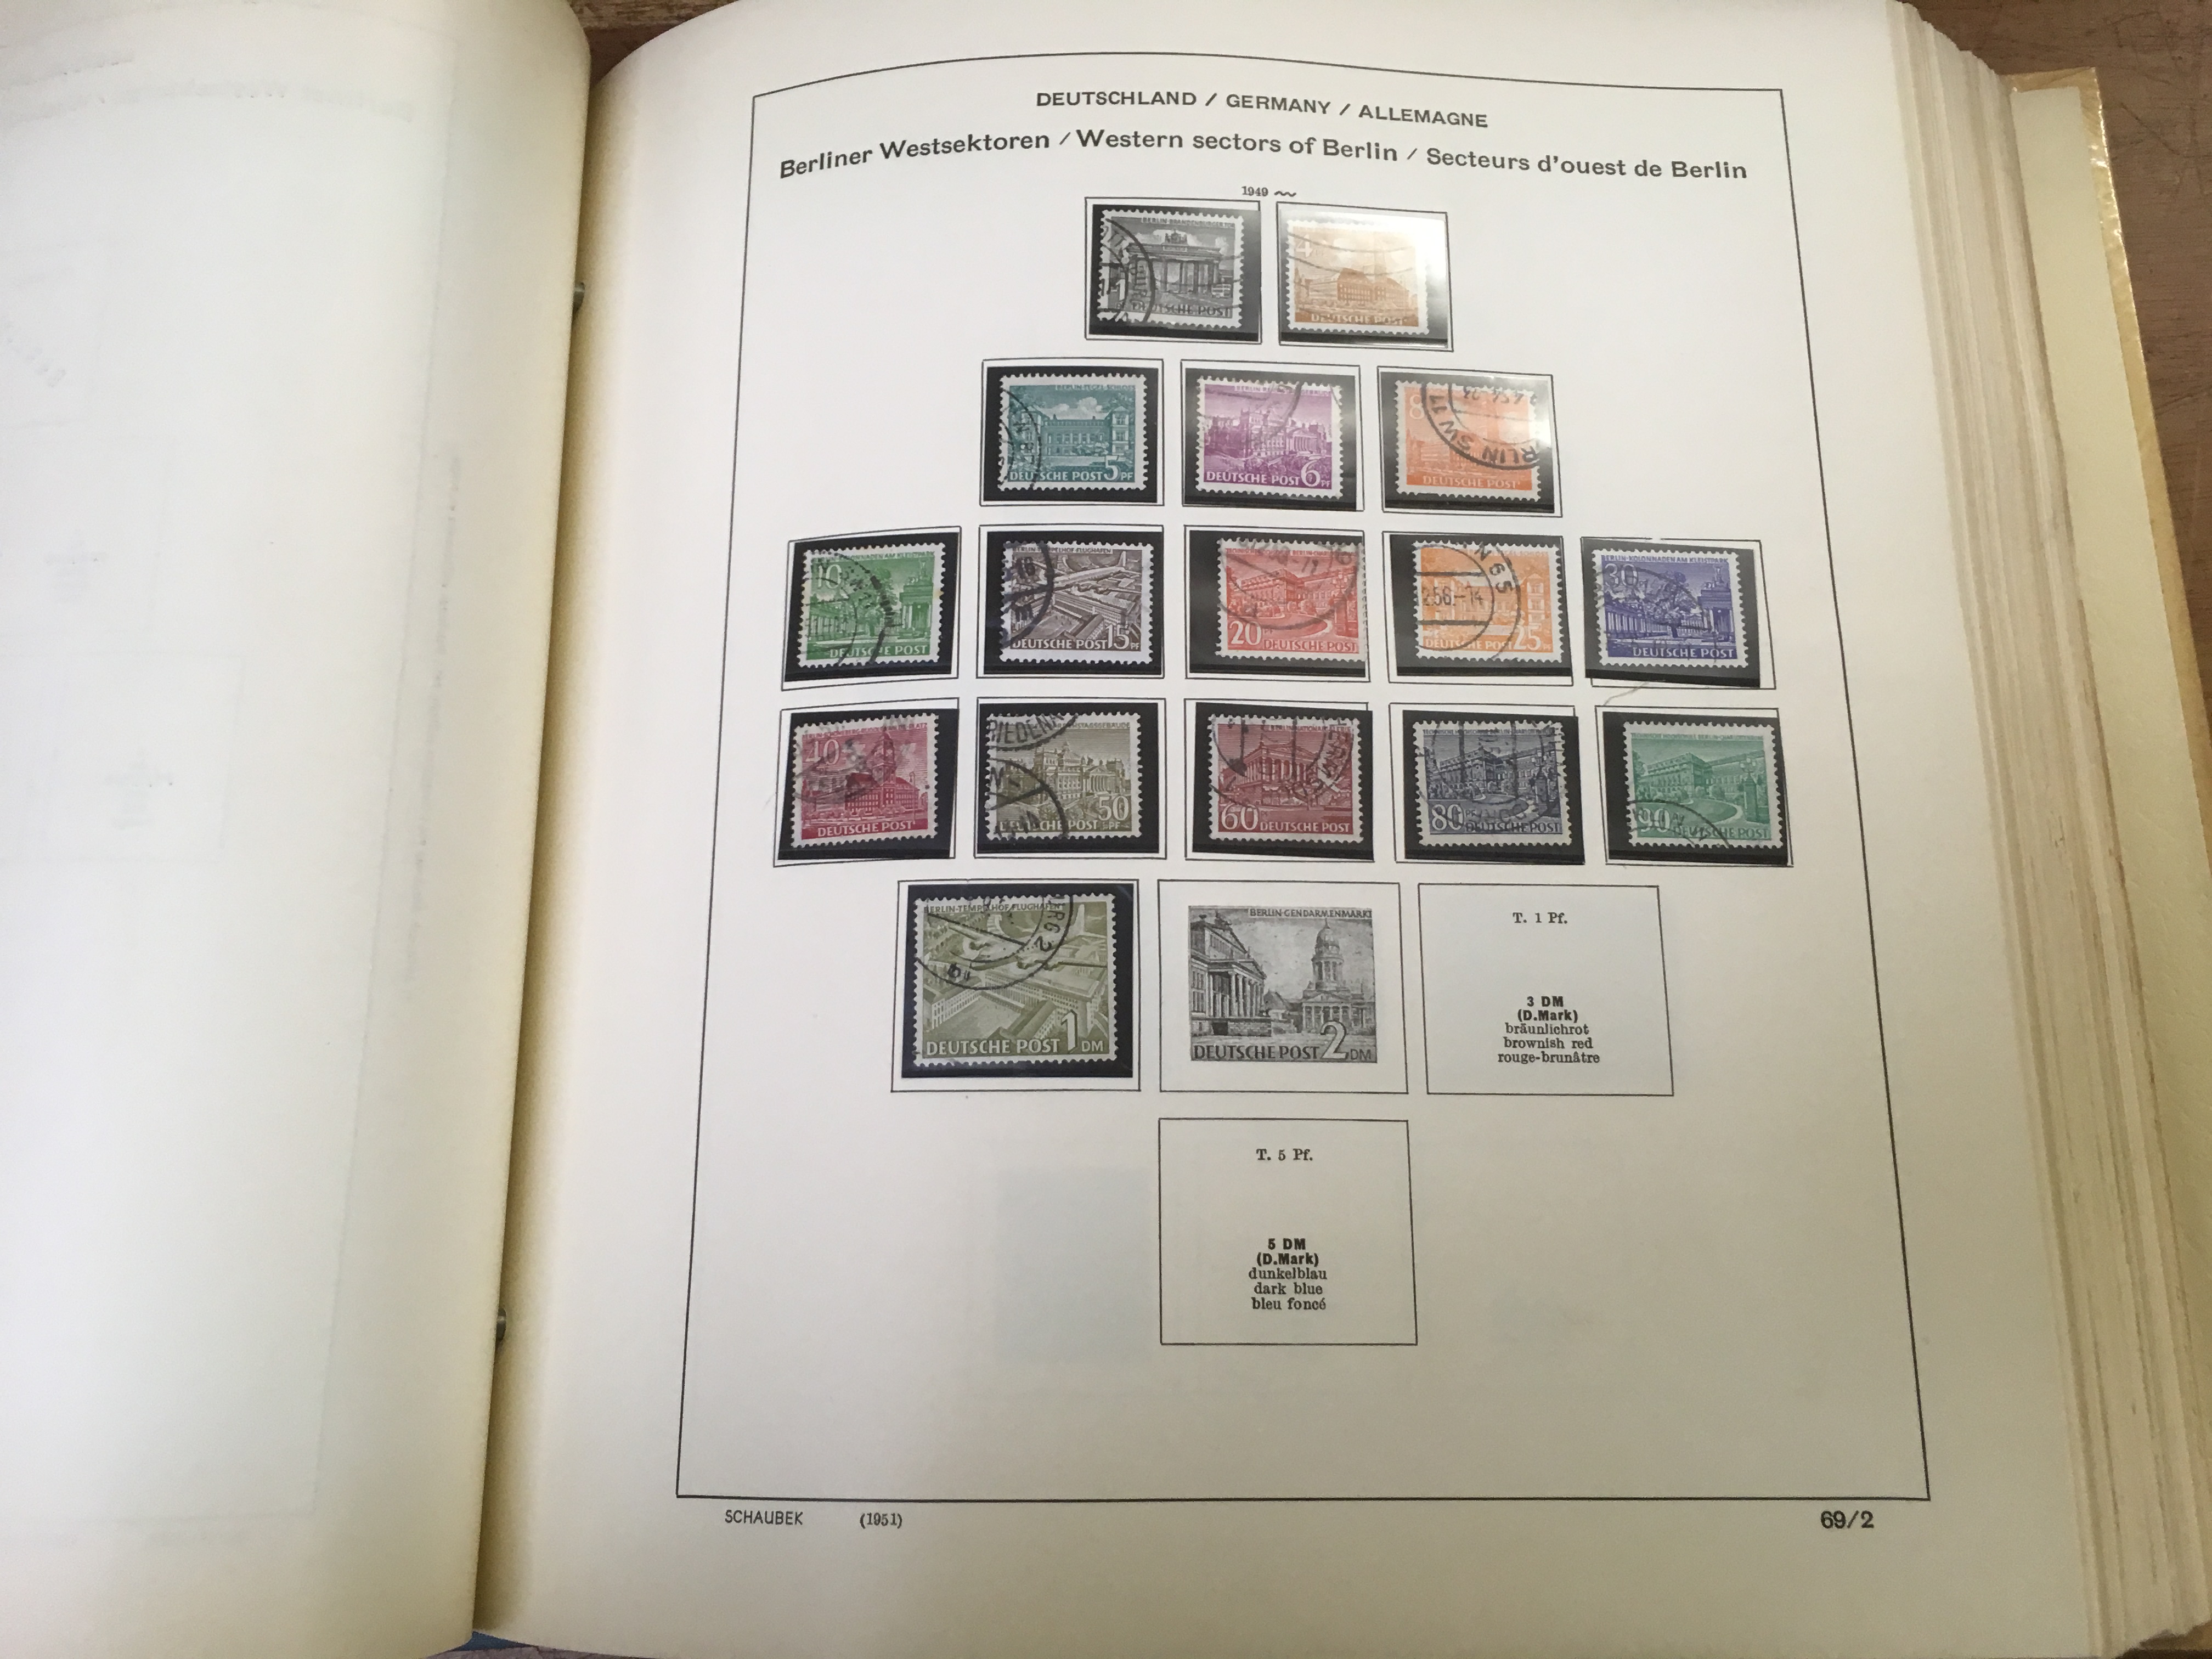 LARGE BOX EUROPEAN STAMP COLLECTIONS IN NINE VOLUMES, PRINTED ALBUMS OF GERMANY, CZECH, ALSO FRANCE, - Image 3 of 9